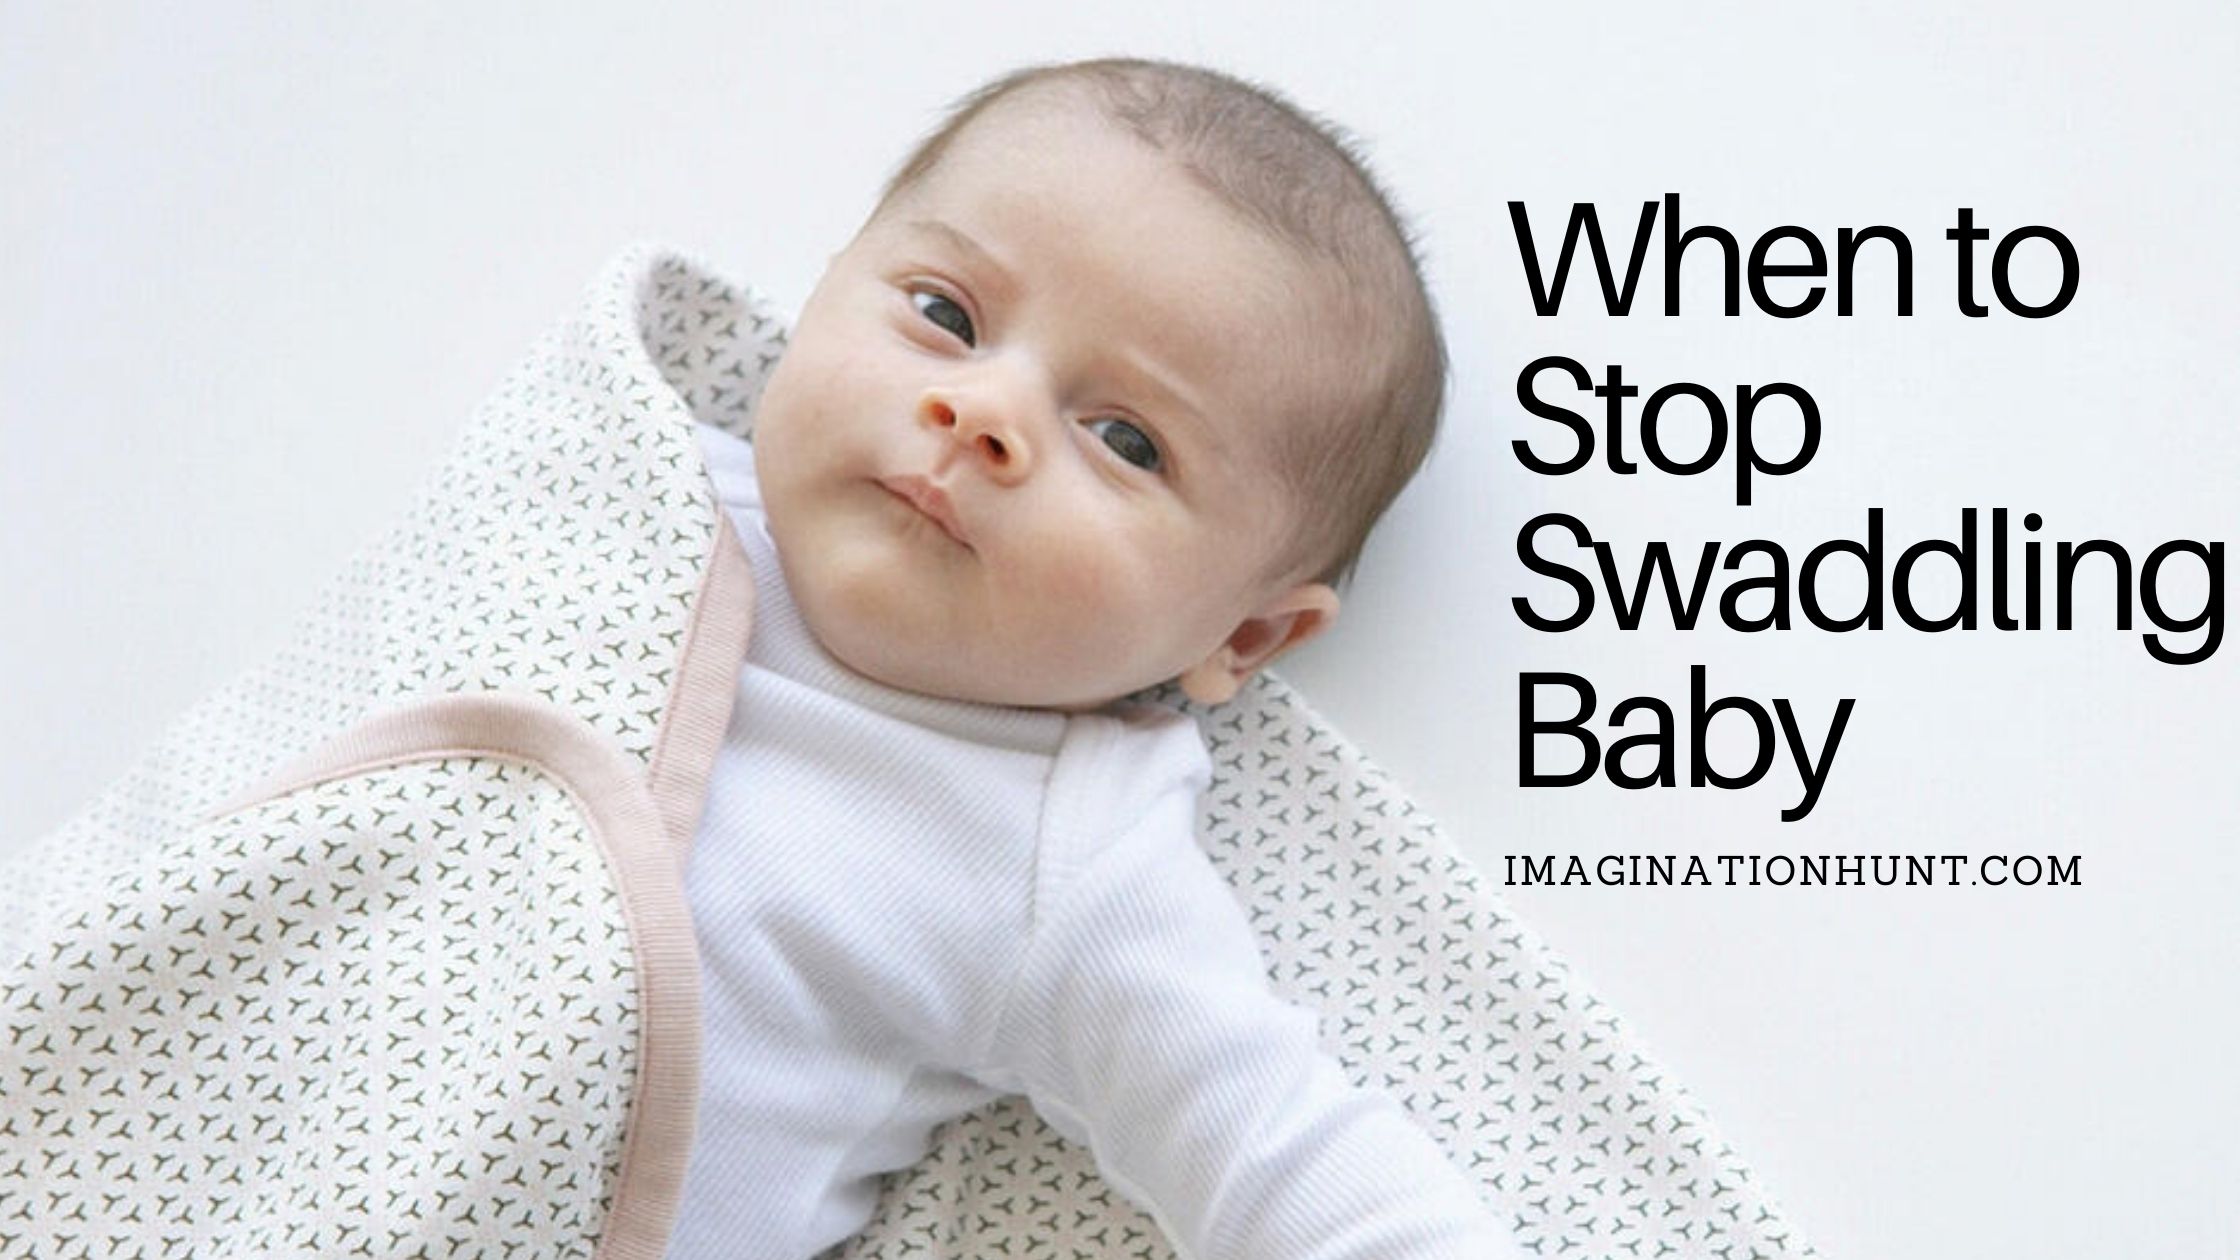 When to Stop Swaddling Baby